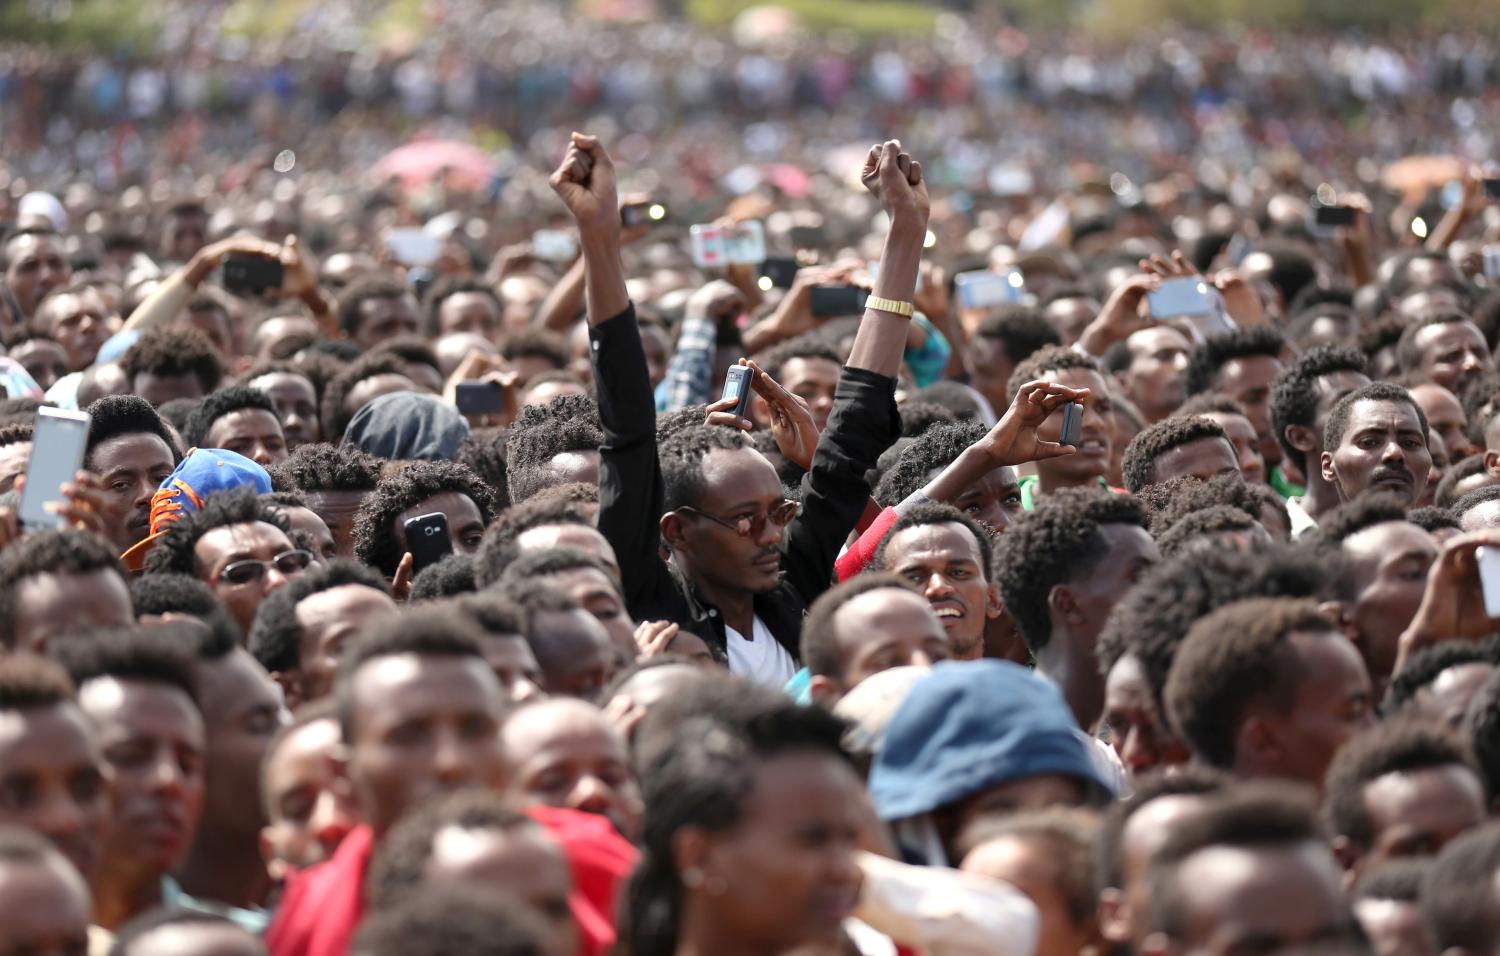 Residents attend a rally by Ethiopia's newly elected prime minister Abiy Ahmed during his visit Ambo in the Oromiya region, Ethiopia April 11, 2018. REUTERS/Tiksa Negeri - RC172DC0DAF0